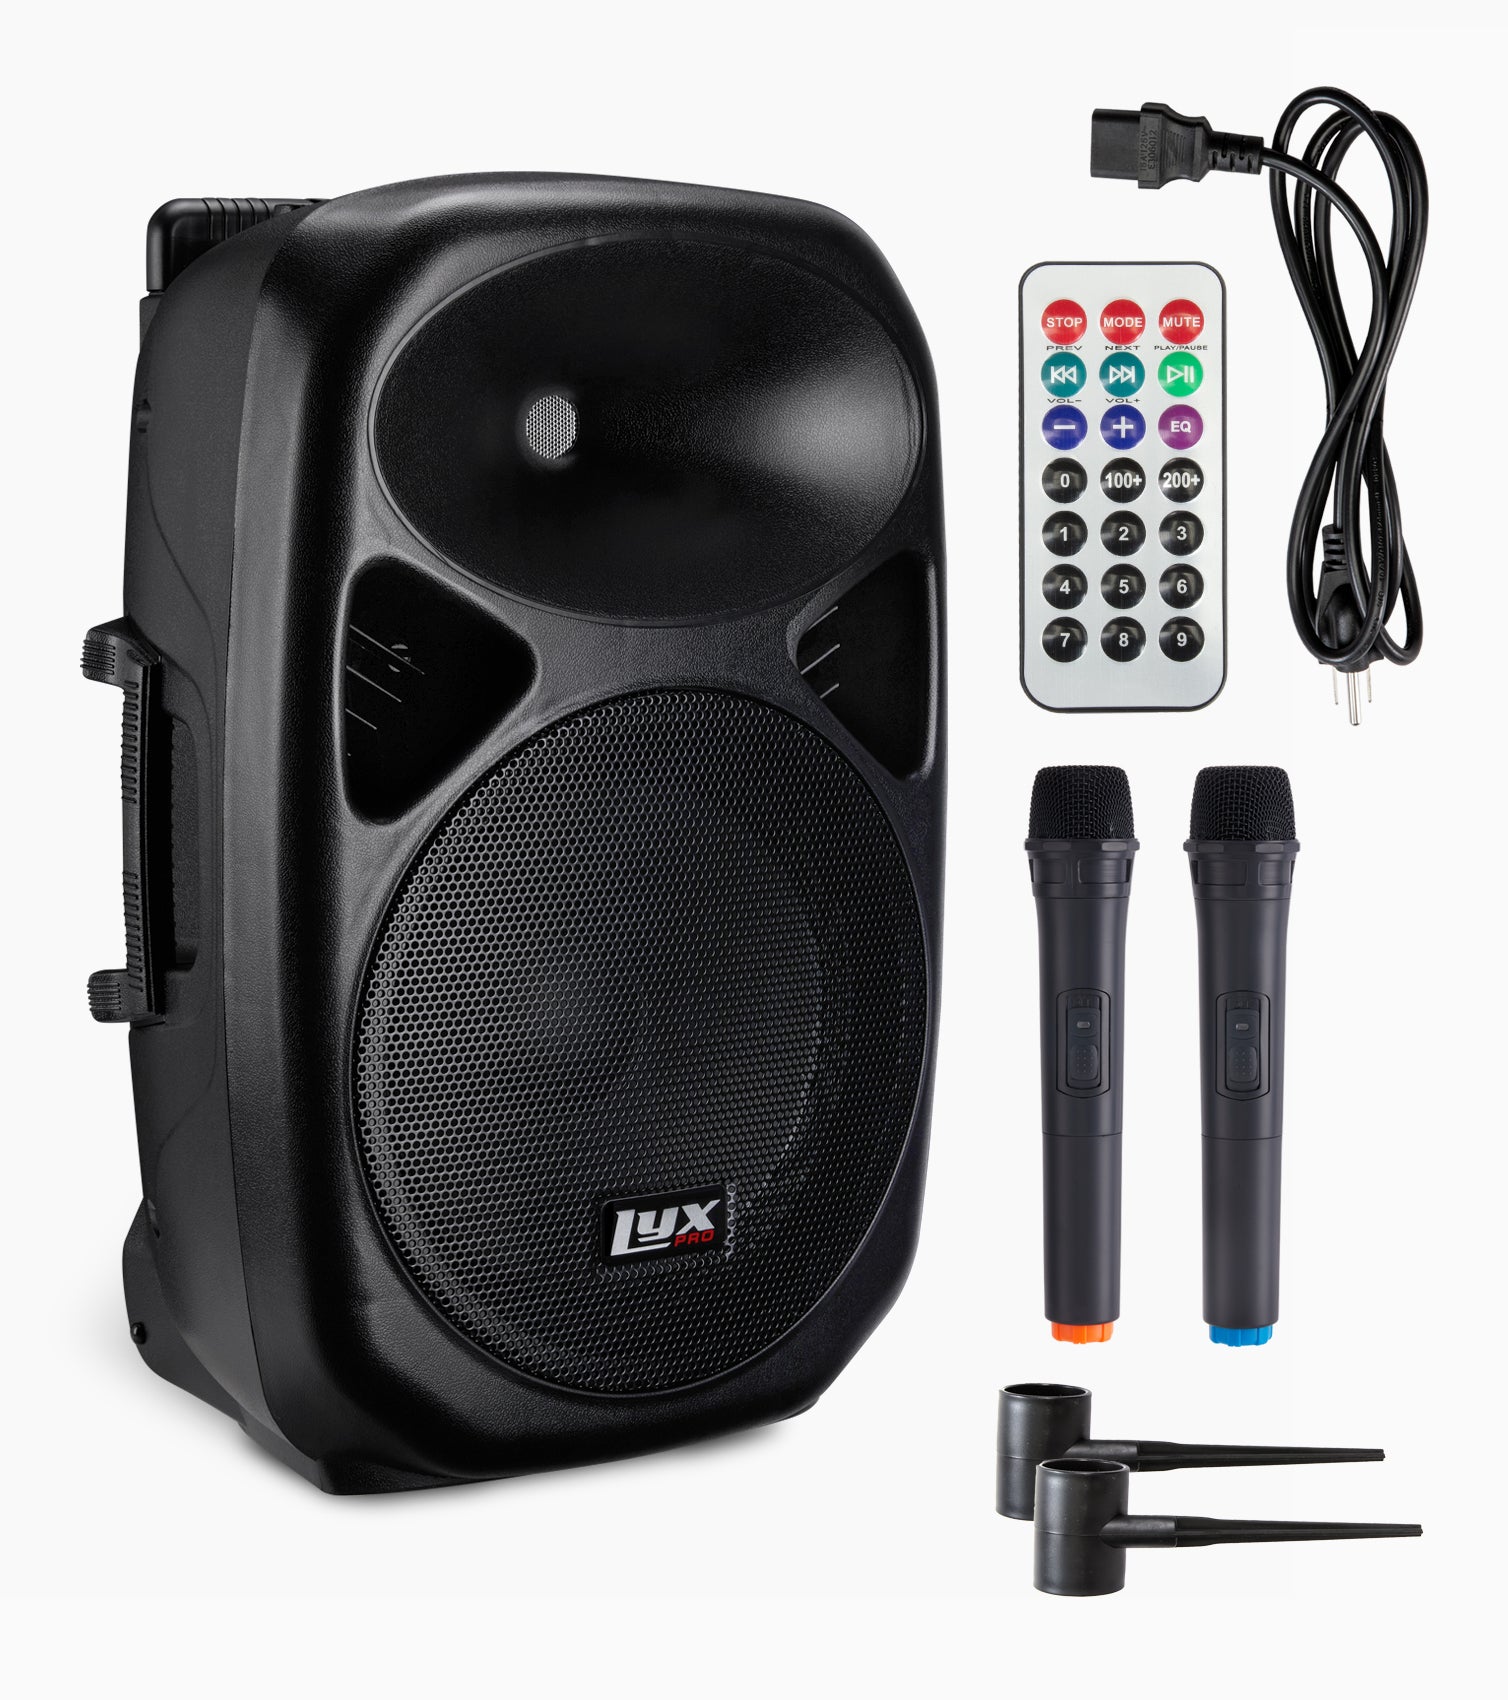 12” portable battery-powered PA speaker, cord, and remote